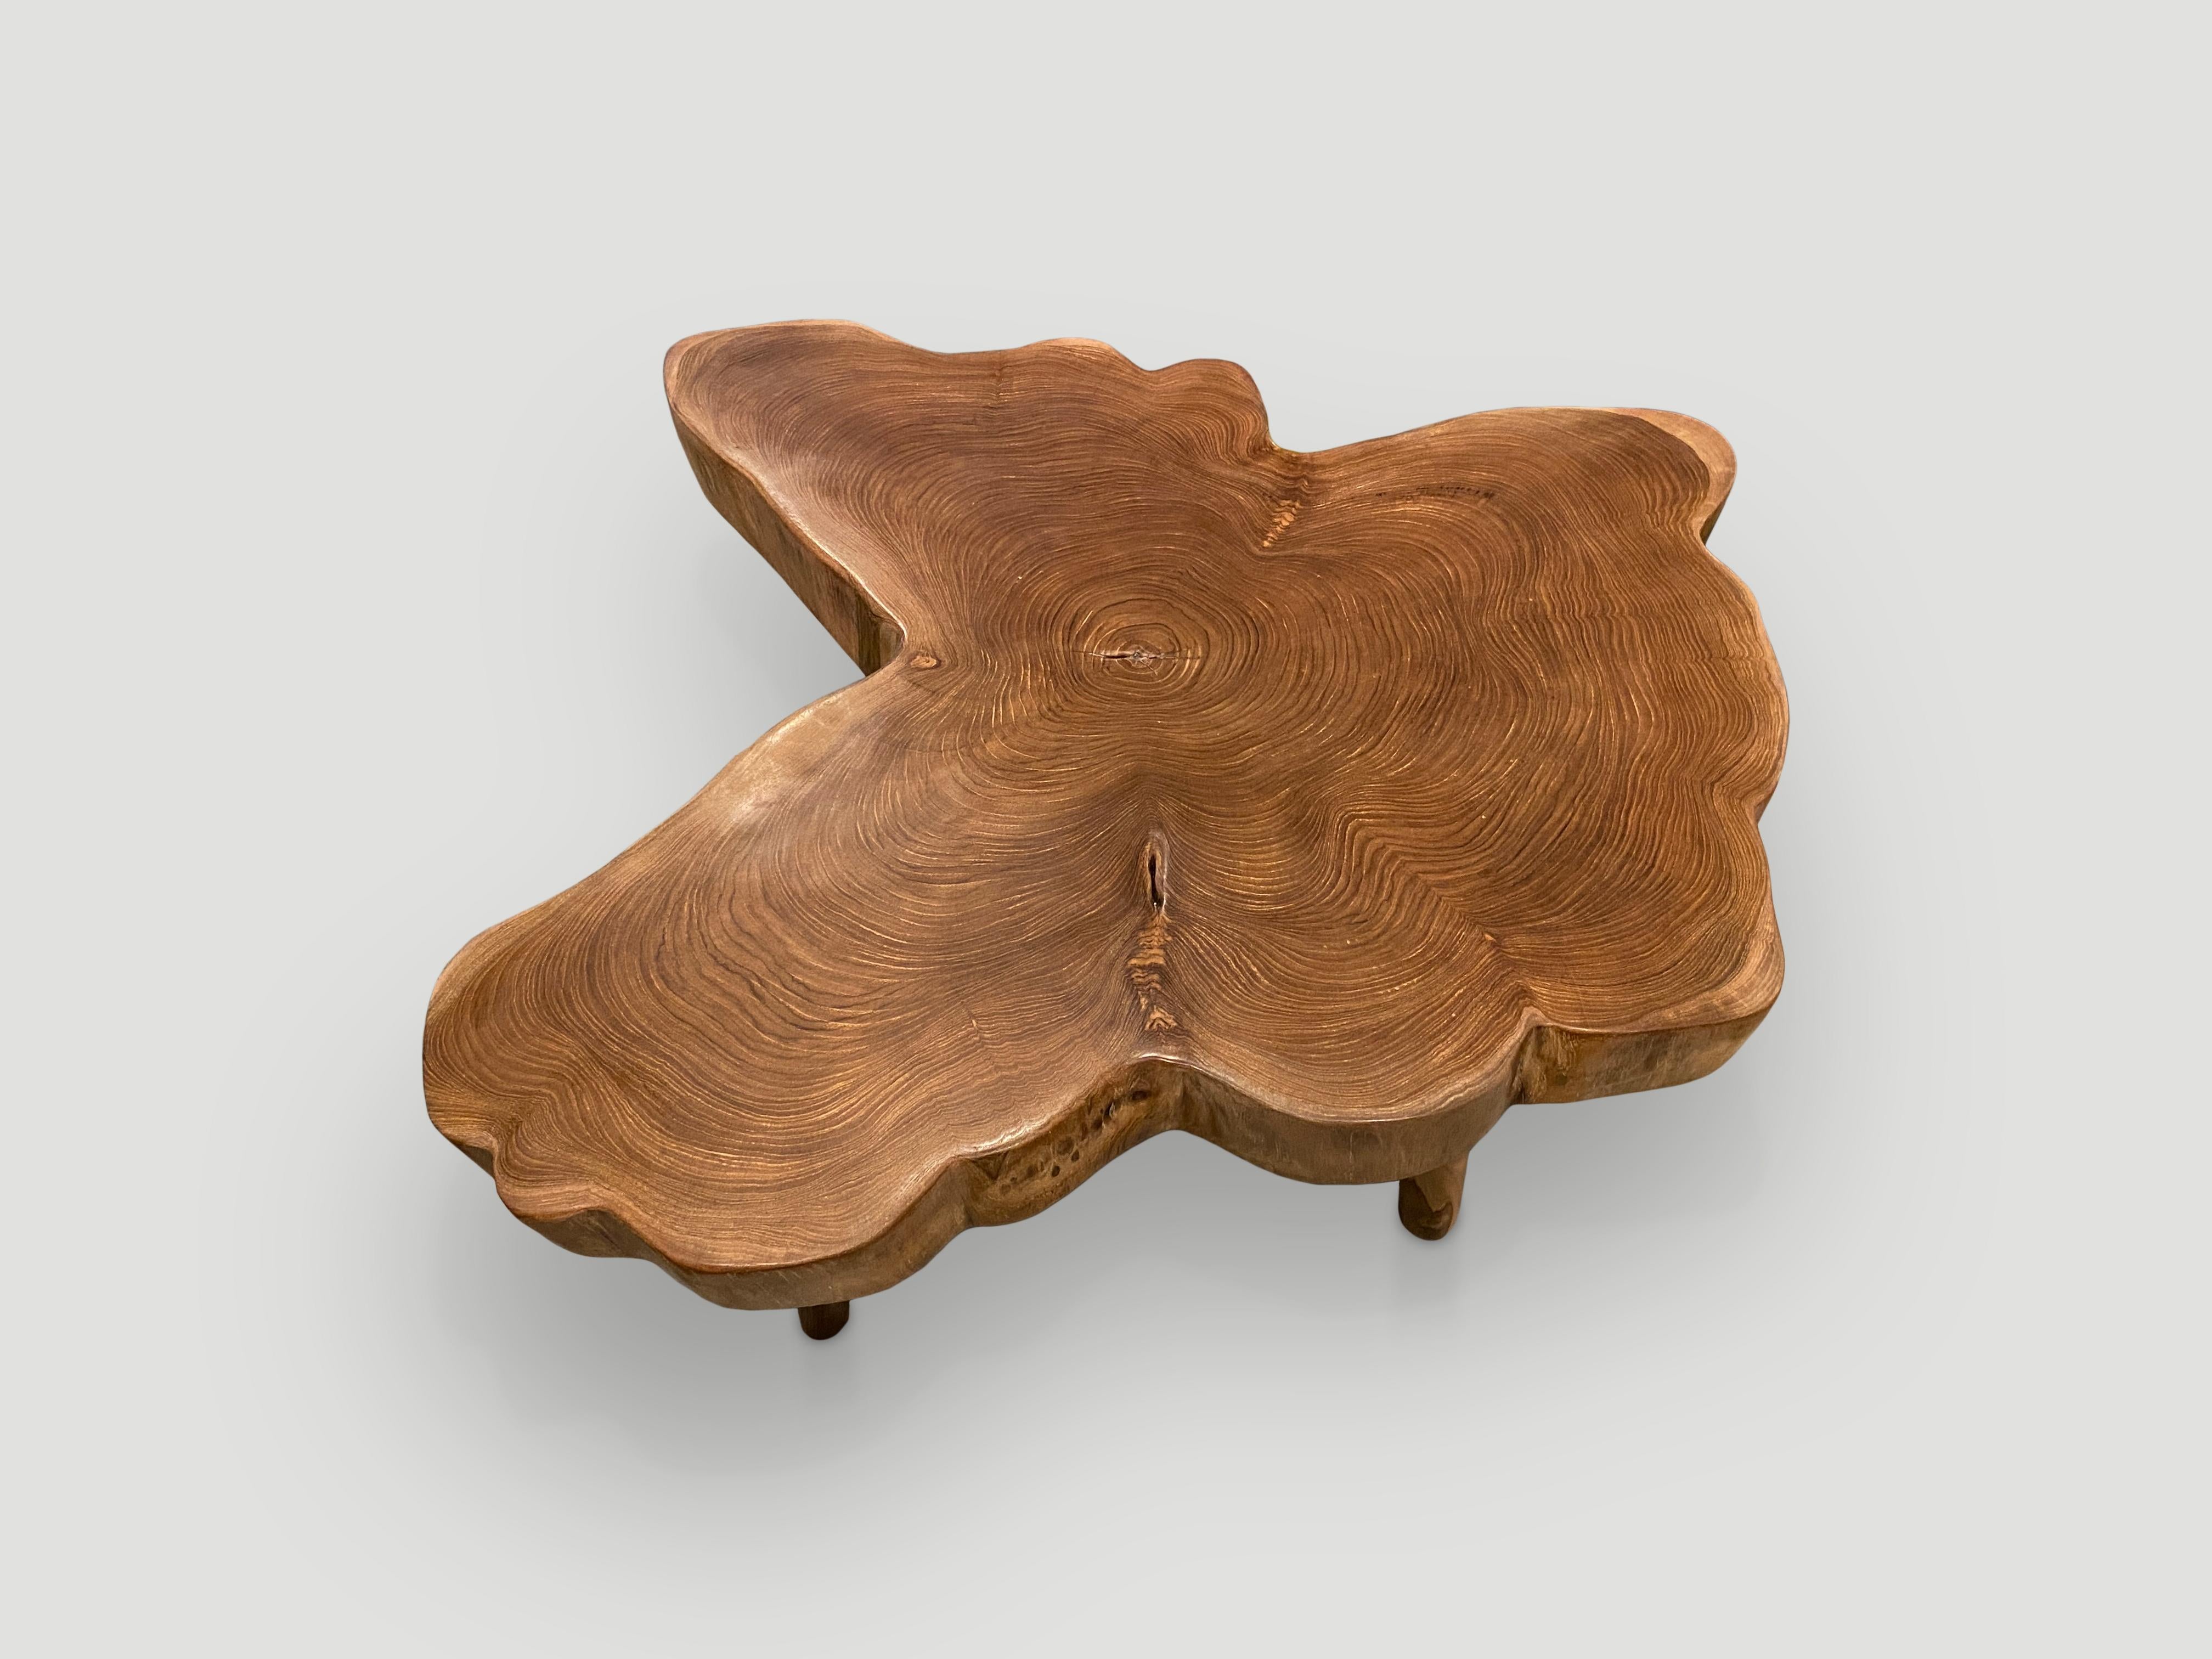 Impressive three inch single slab live edge teak wood coffee table. This beautiful butterfly shape is set on minimalist mid century style legs. Finished with a natural oil revealing the beautiful wood grain. We have a collection. The price and